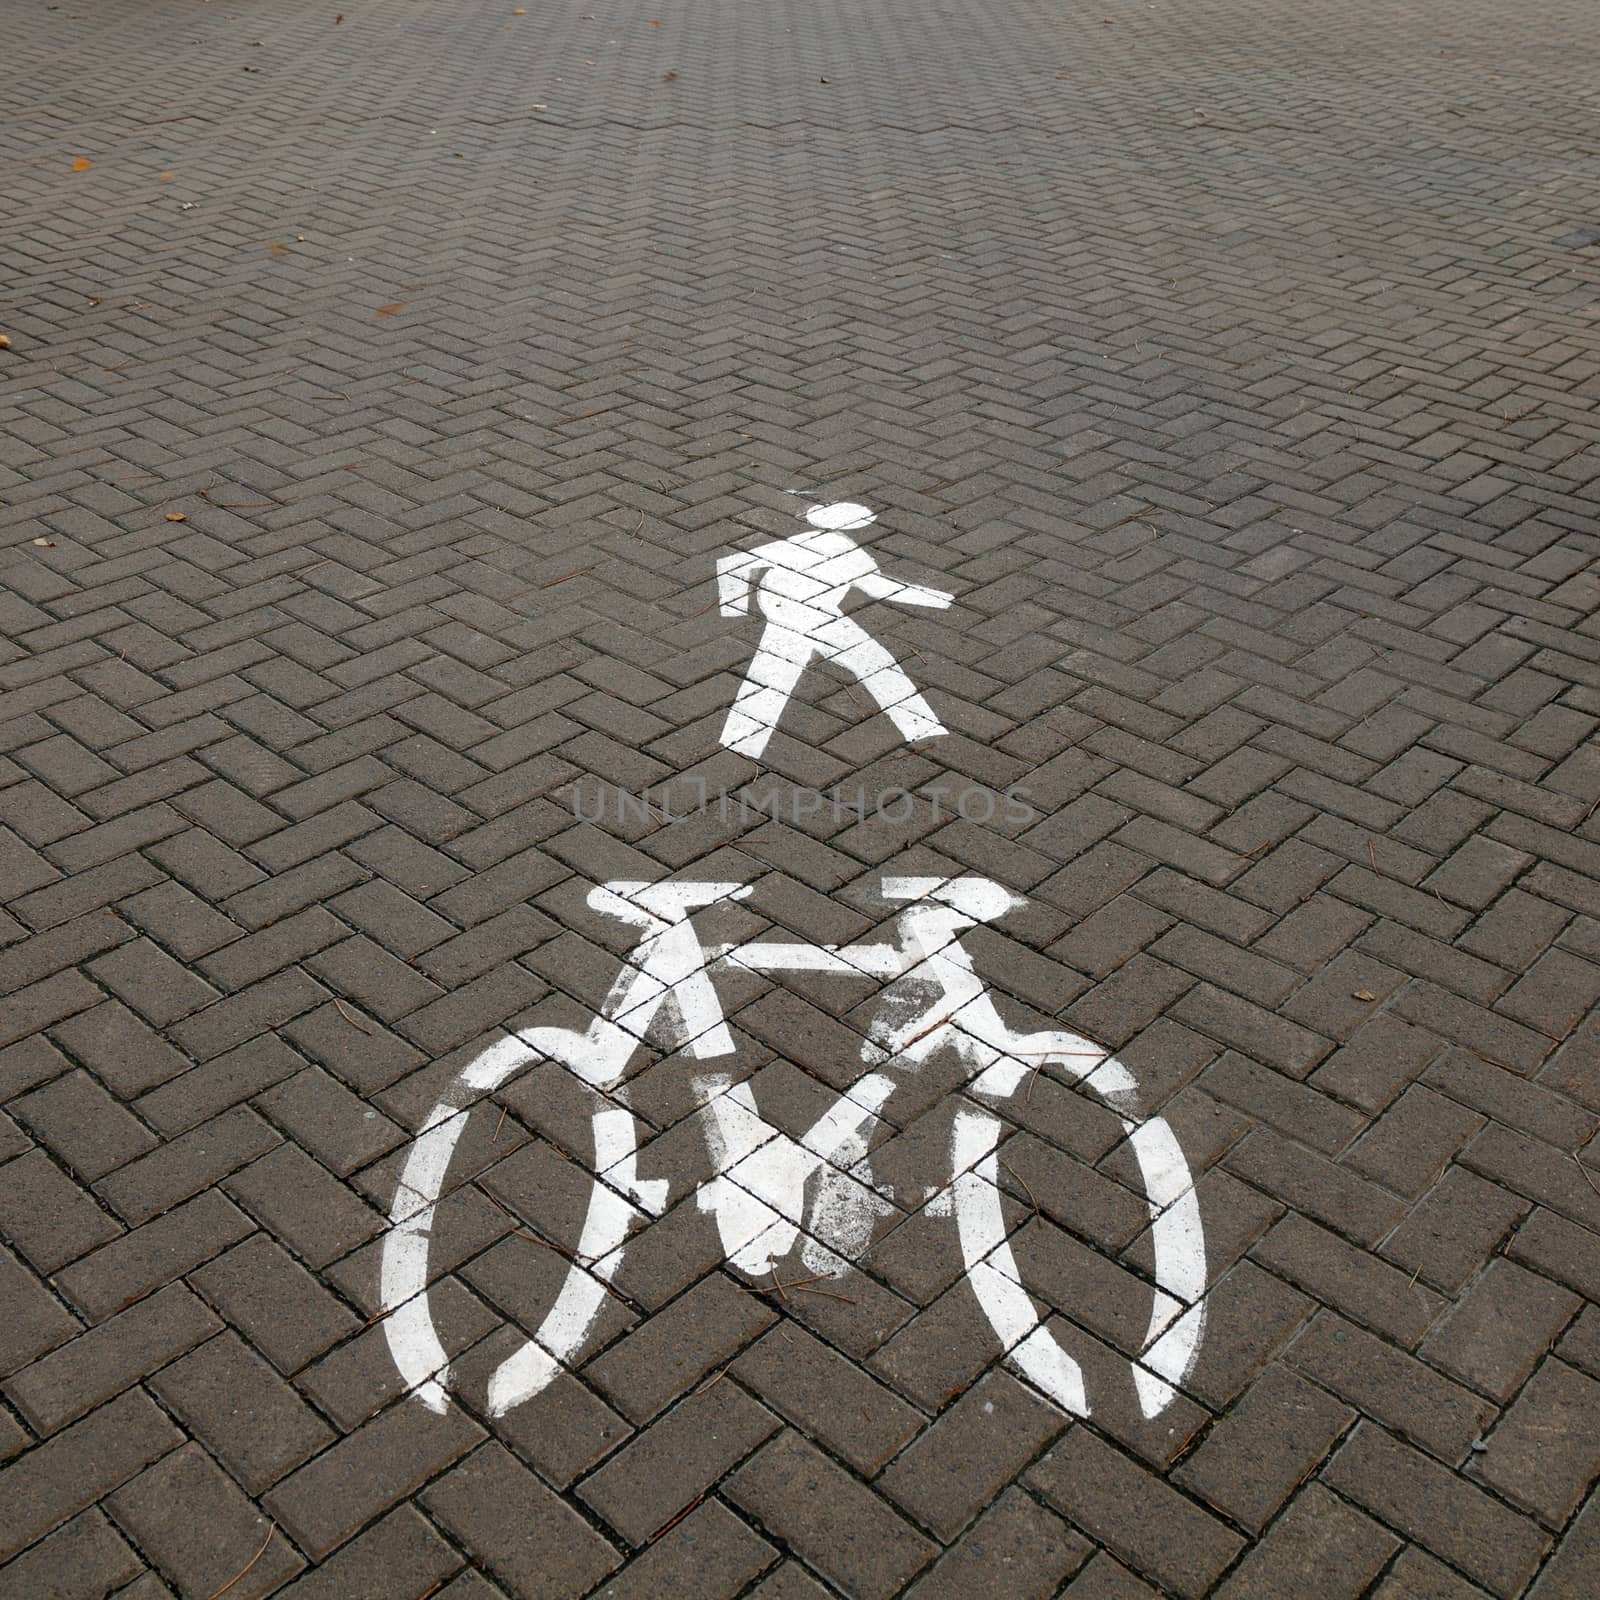 Painted sign for bikes and pedestrian. by mrpeak